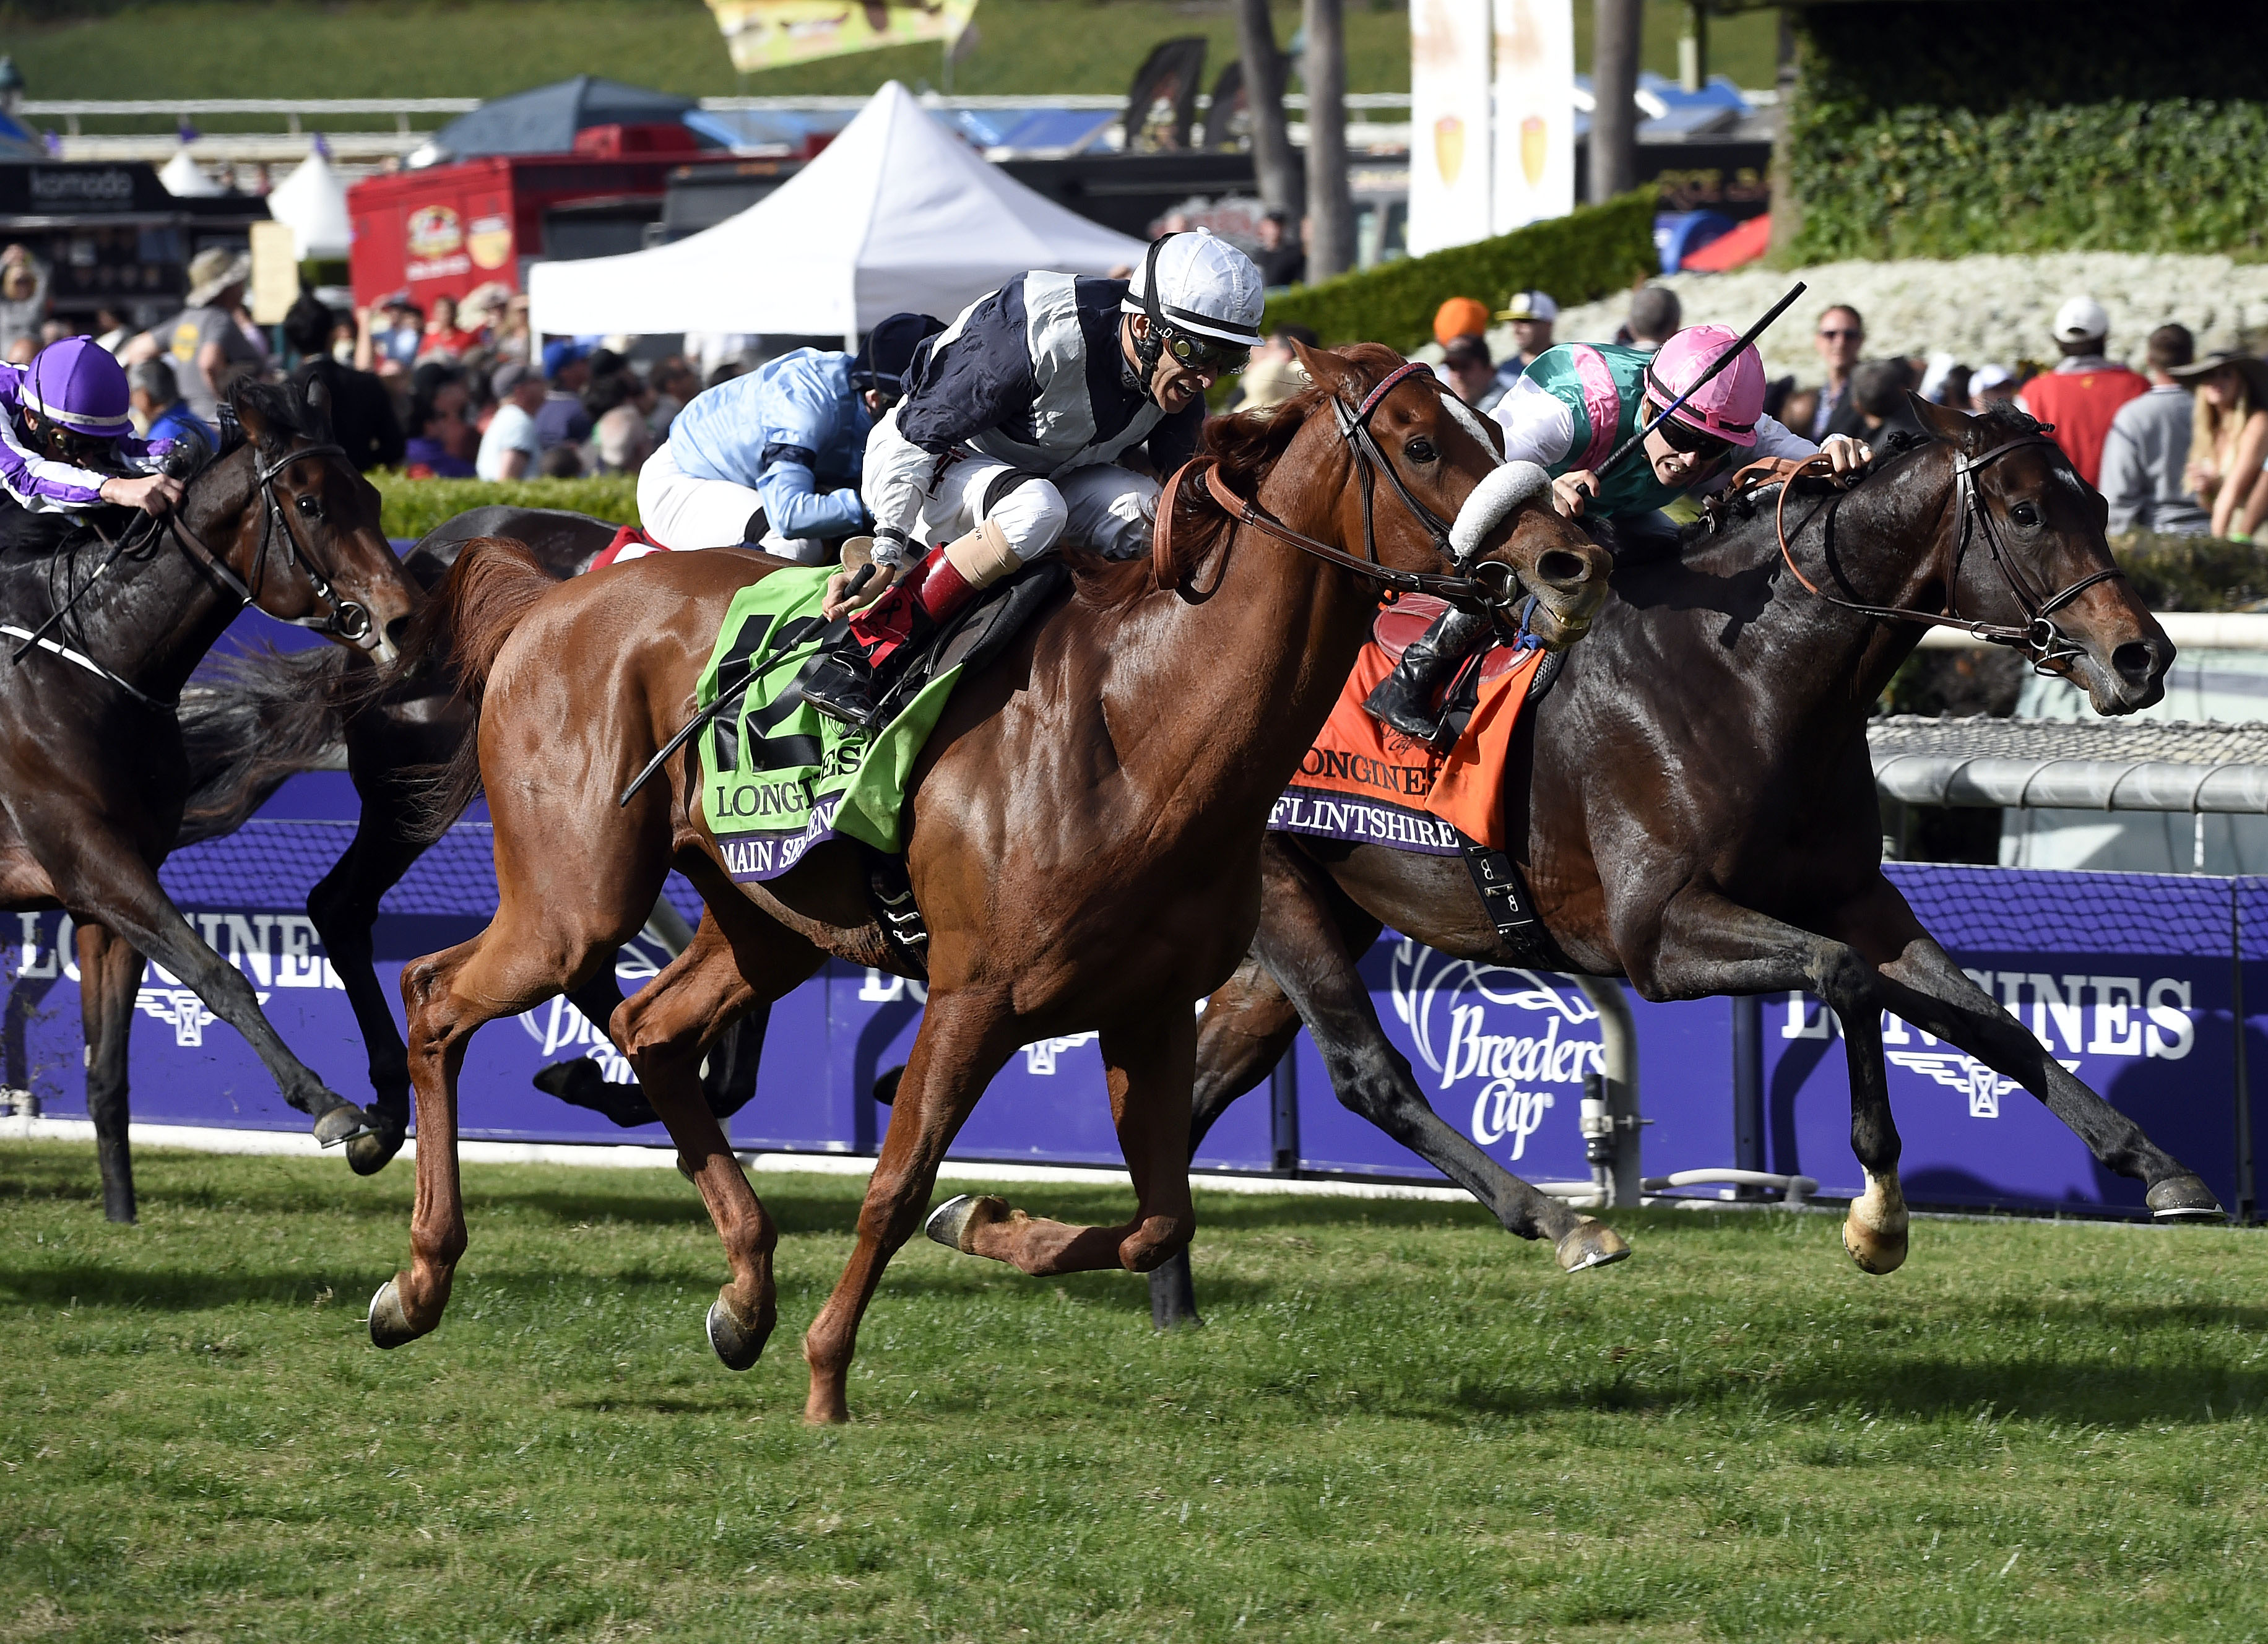 Flintshire (Maxime Guyon, pink cap) gets up on the inside to take second in the Breeders' Cup Turf earlier this month. Photo: USA Today Sports